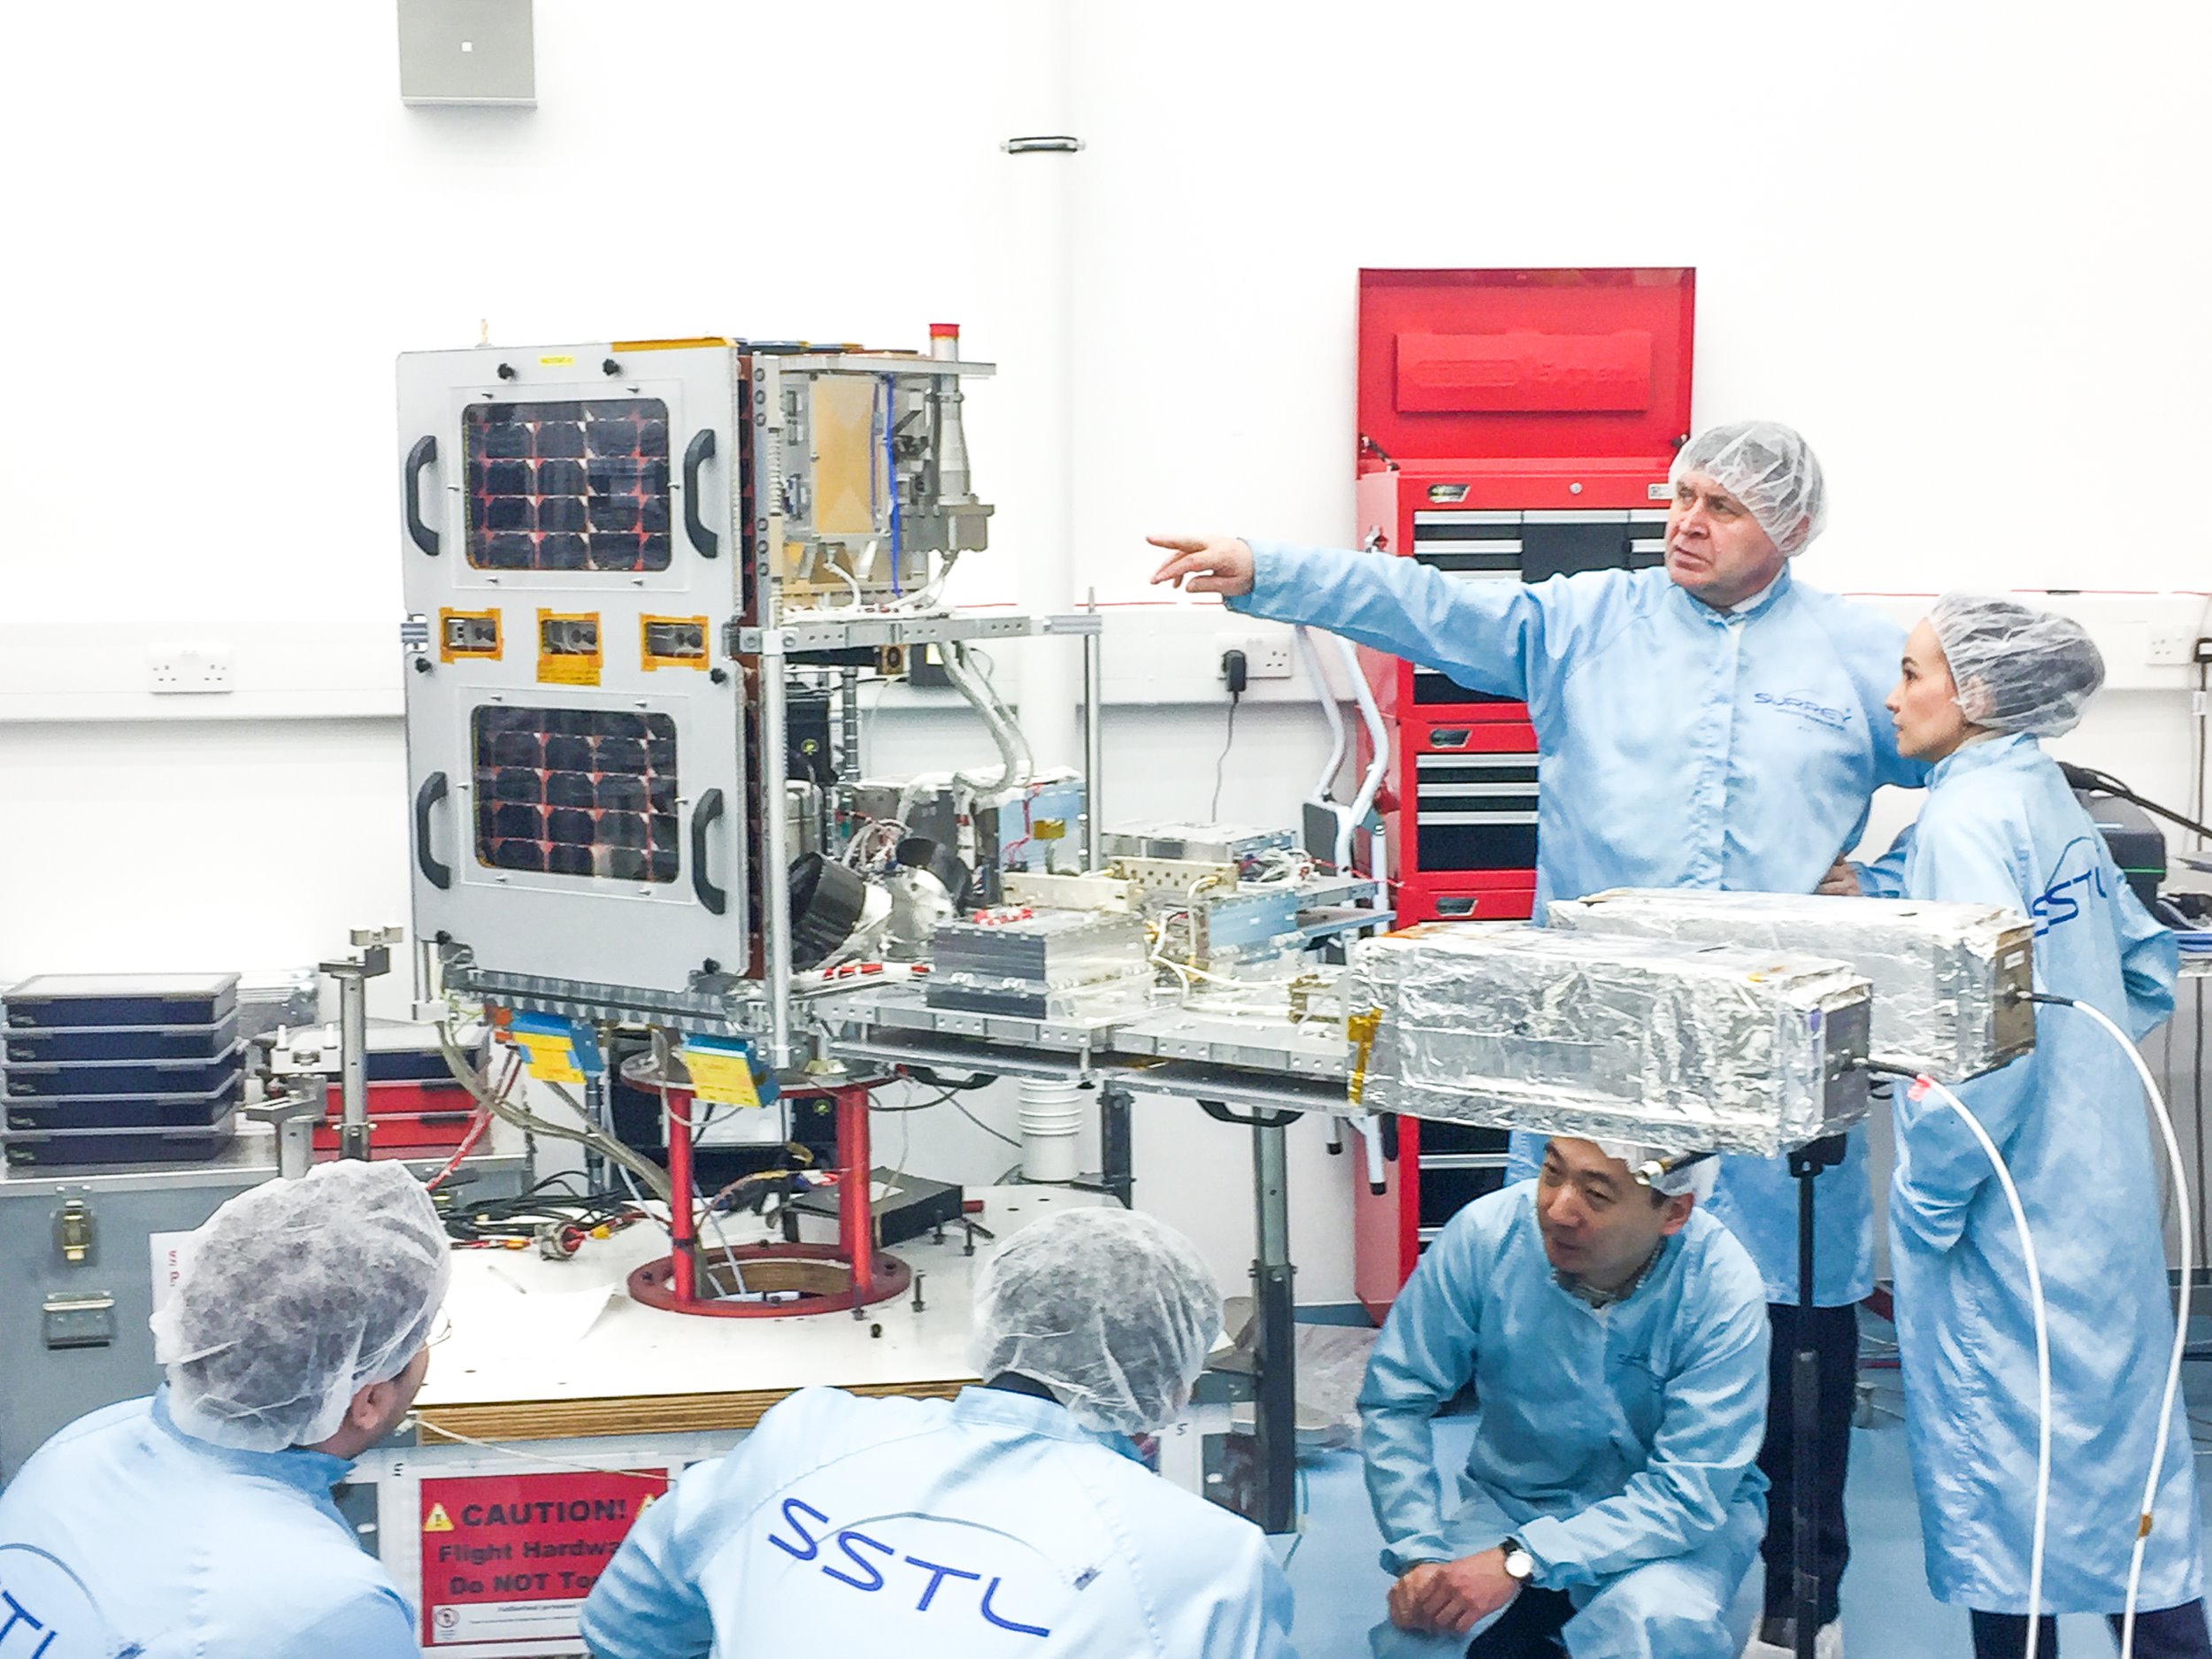 KazSTSat and VESTA due to lift-off on Spaceflight’s SSO-A SmallSat Express Mission